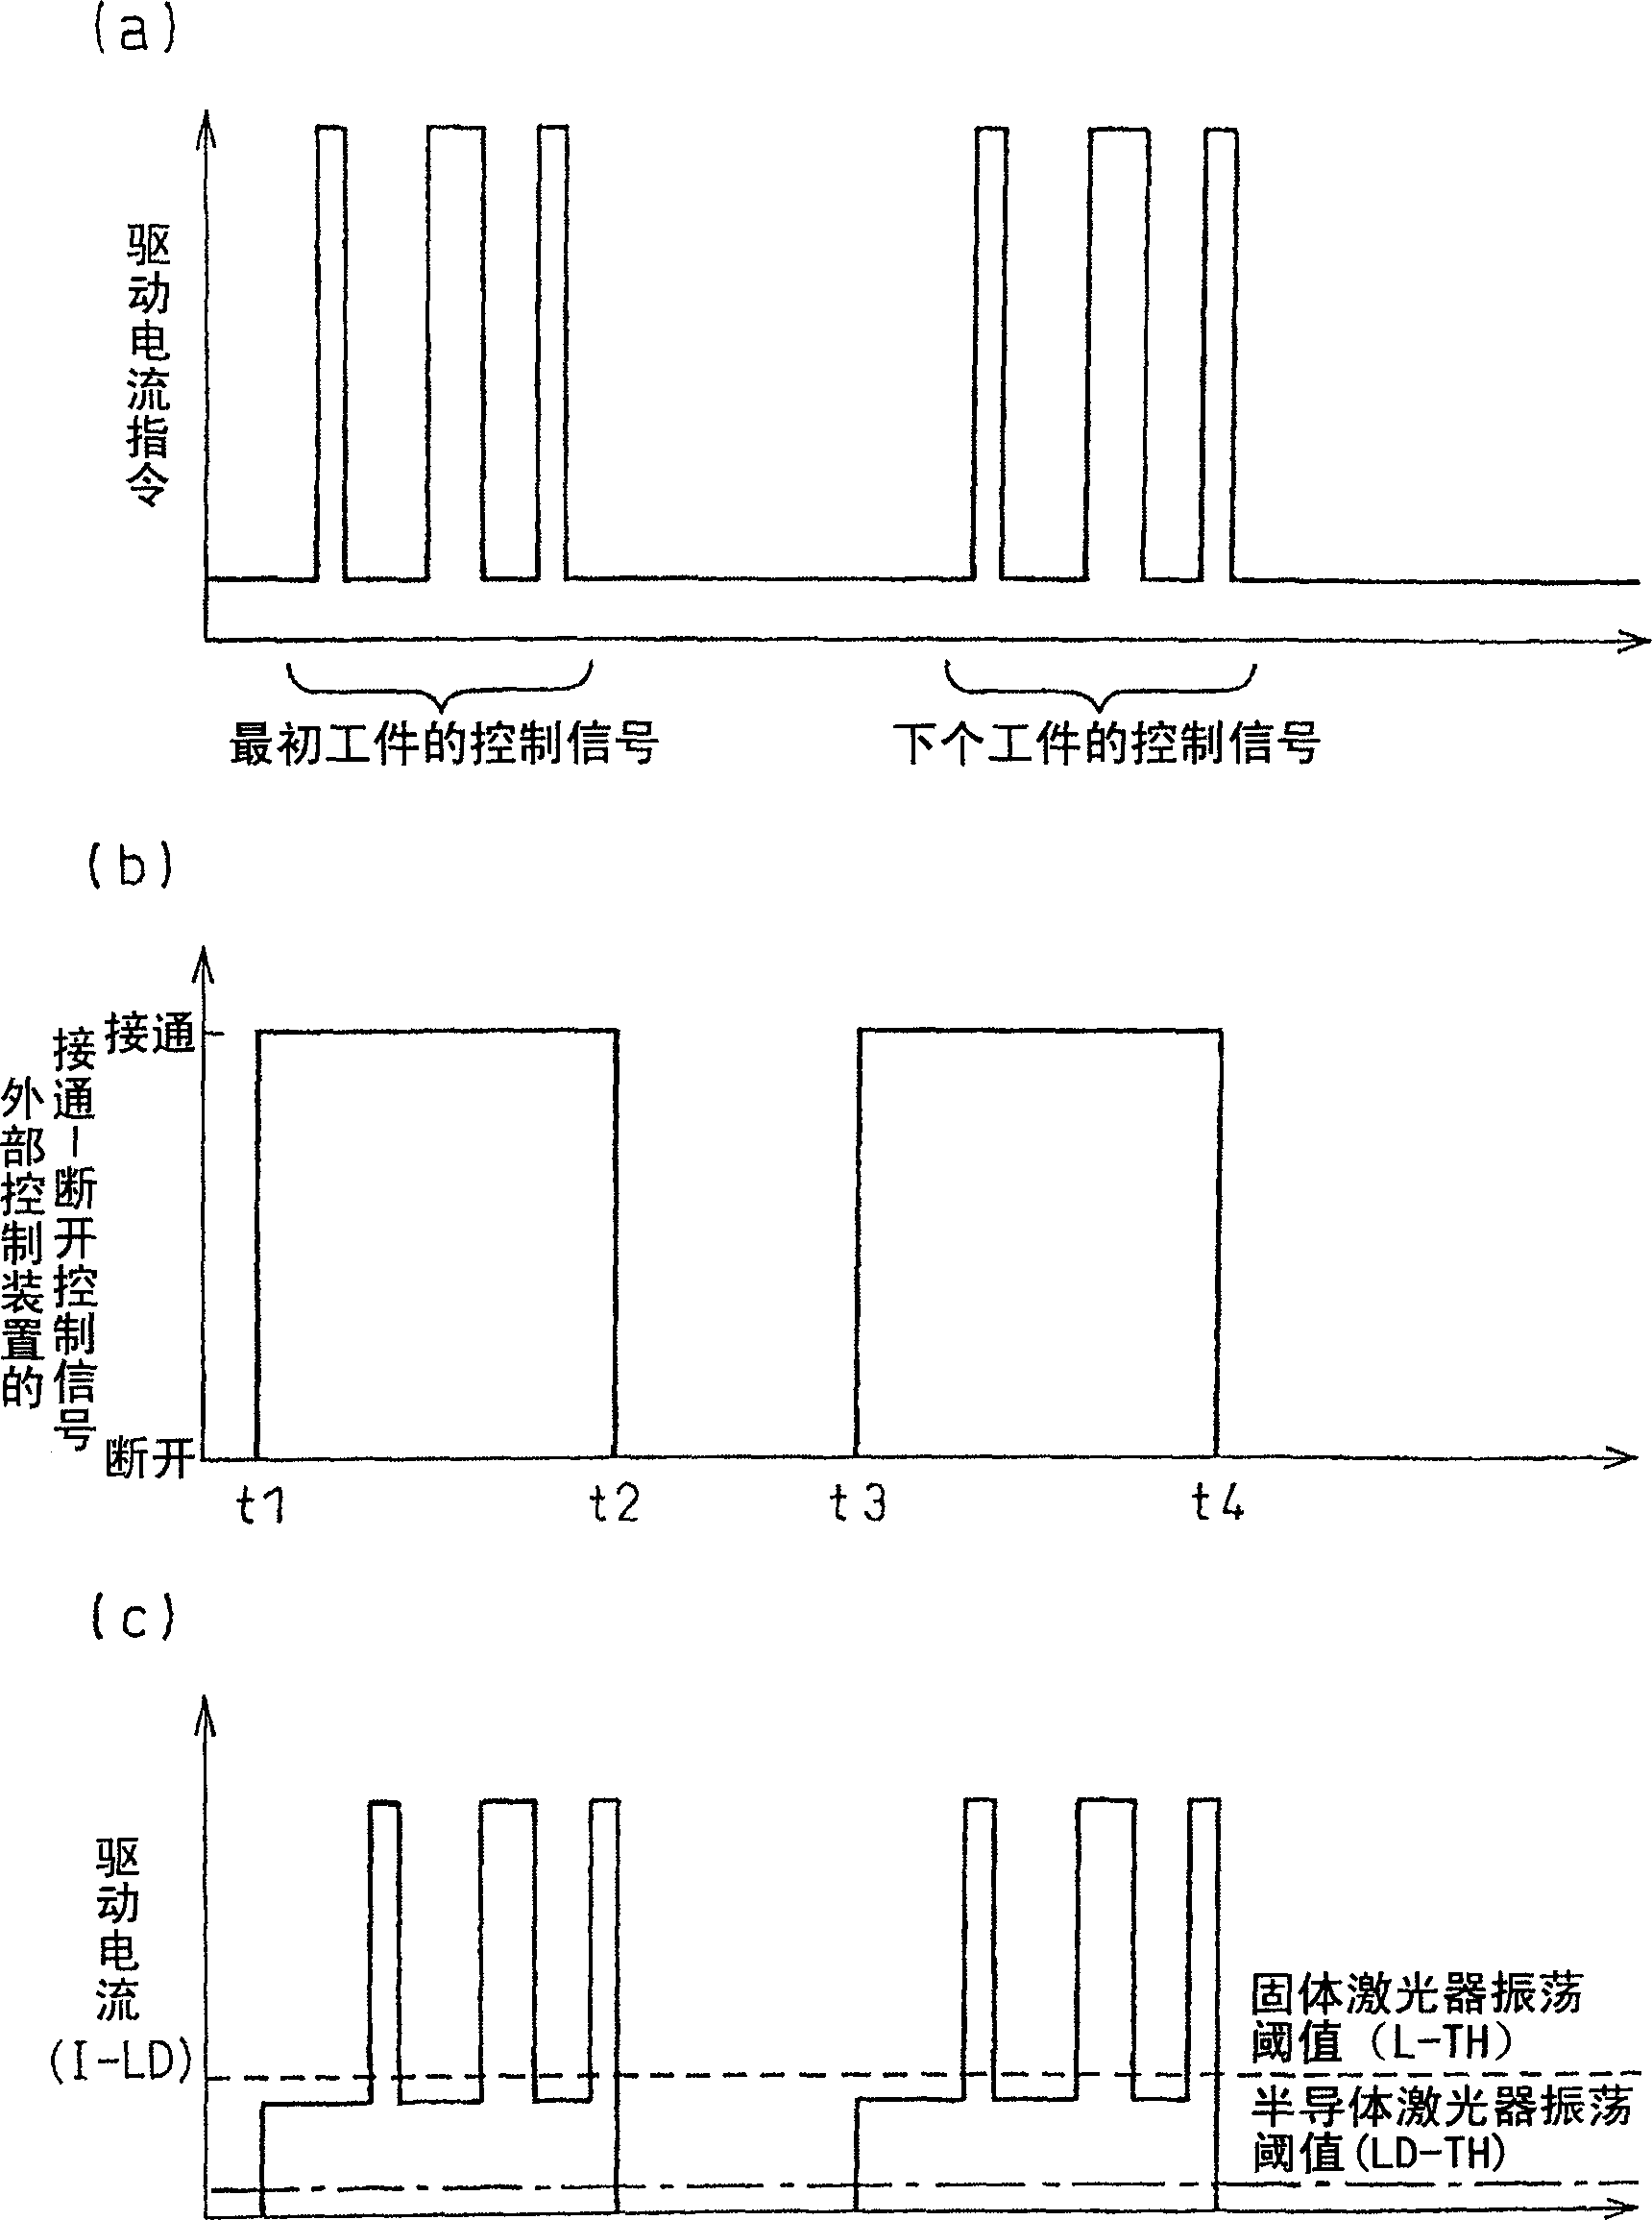 Semiconductor-laser-pumped solid-state laser apparatus